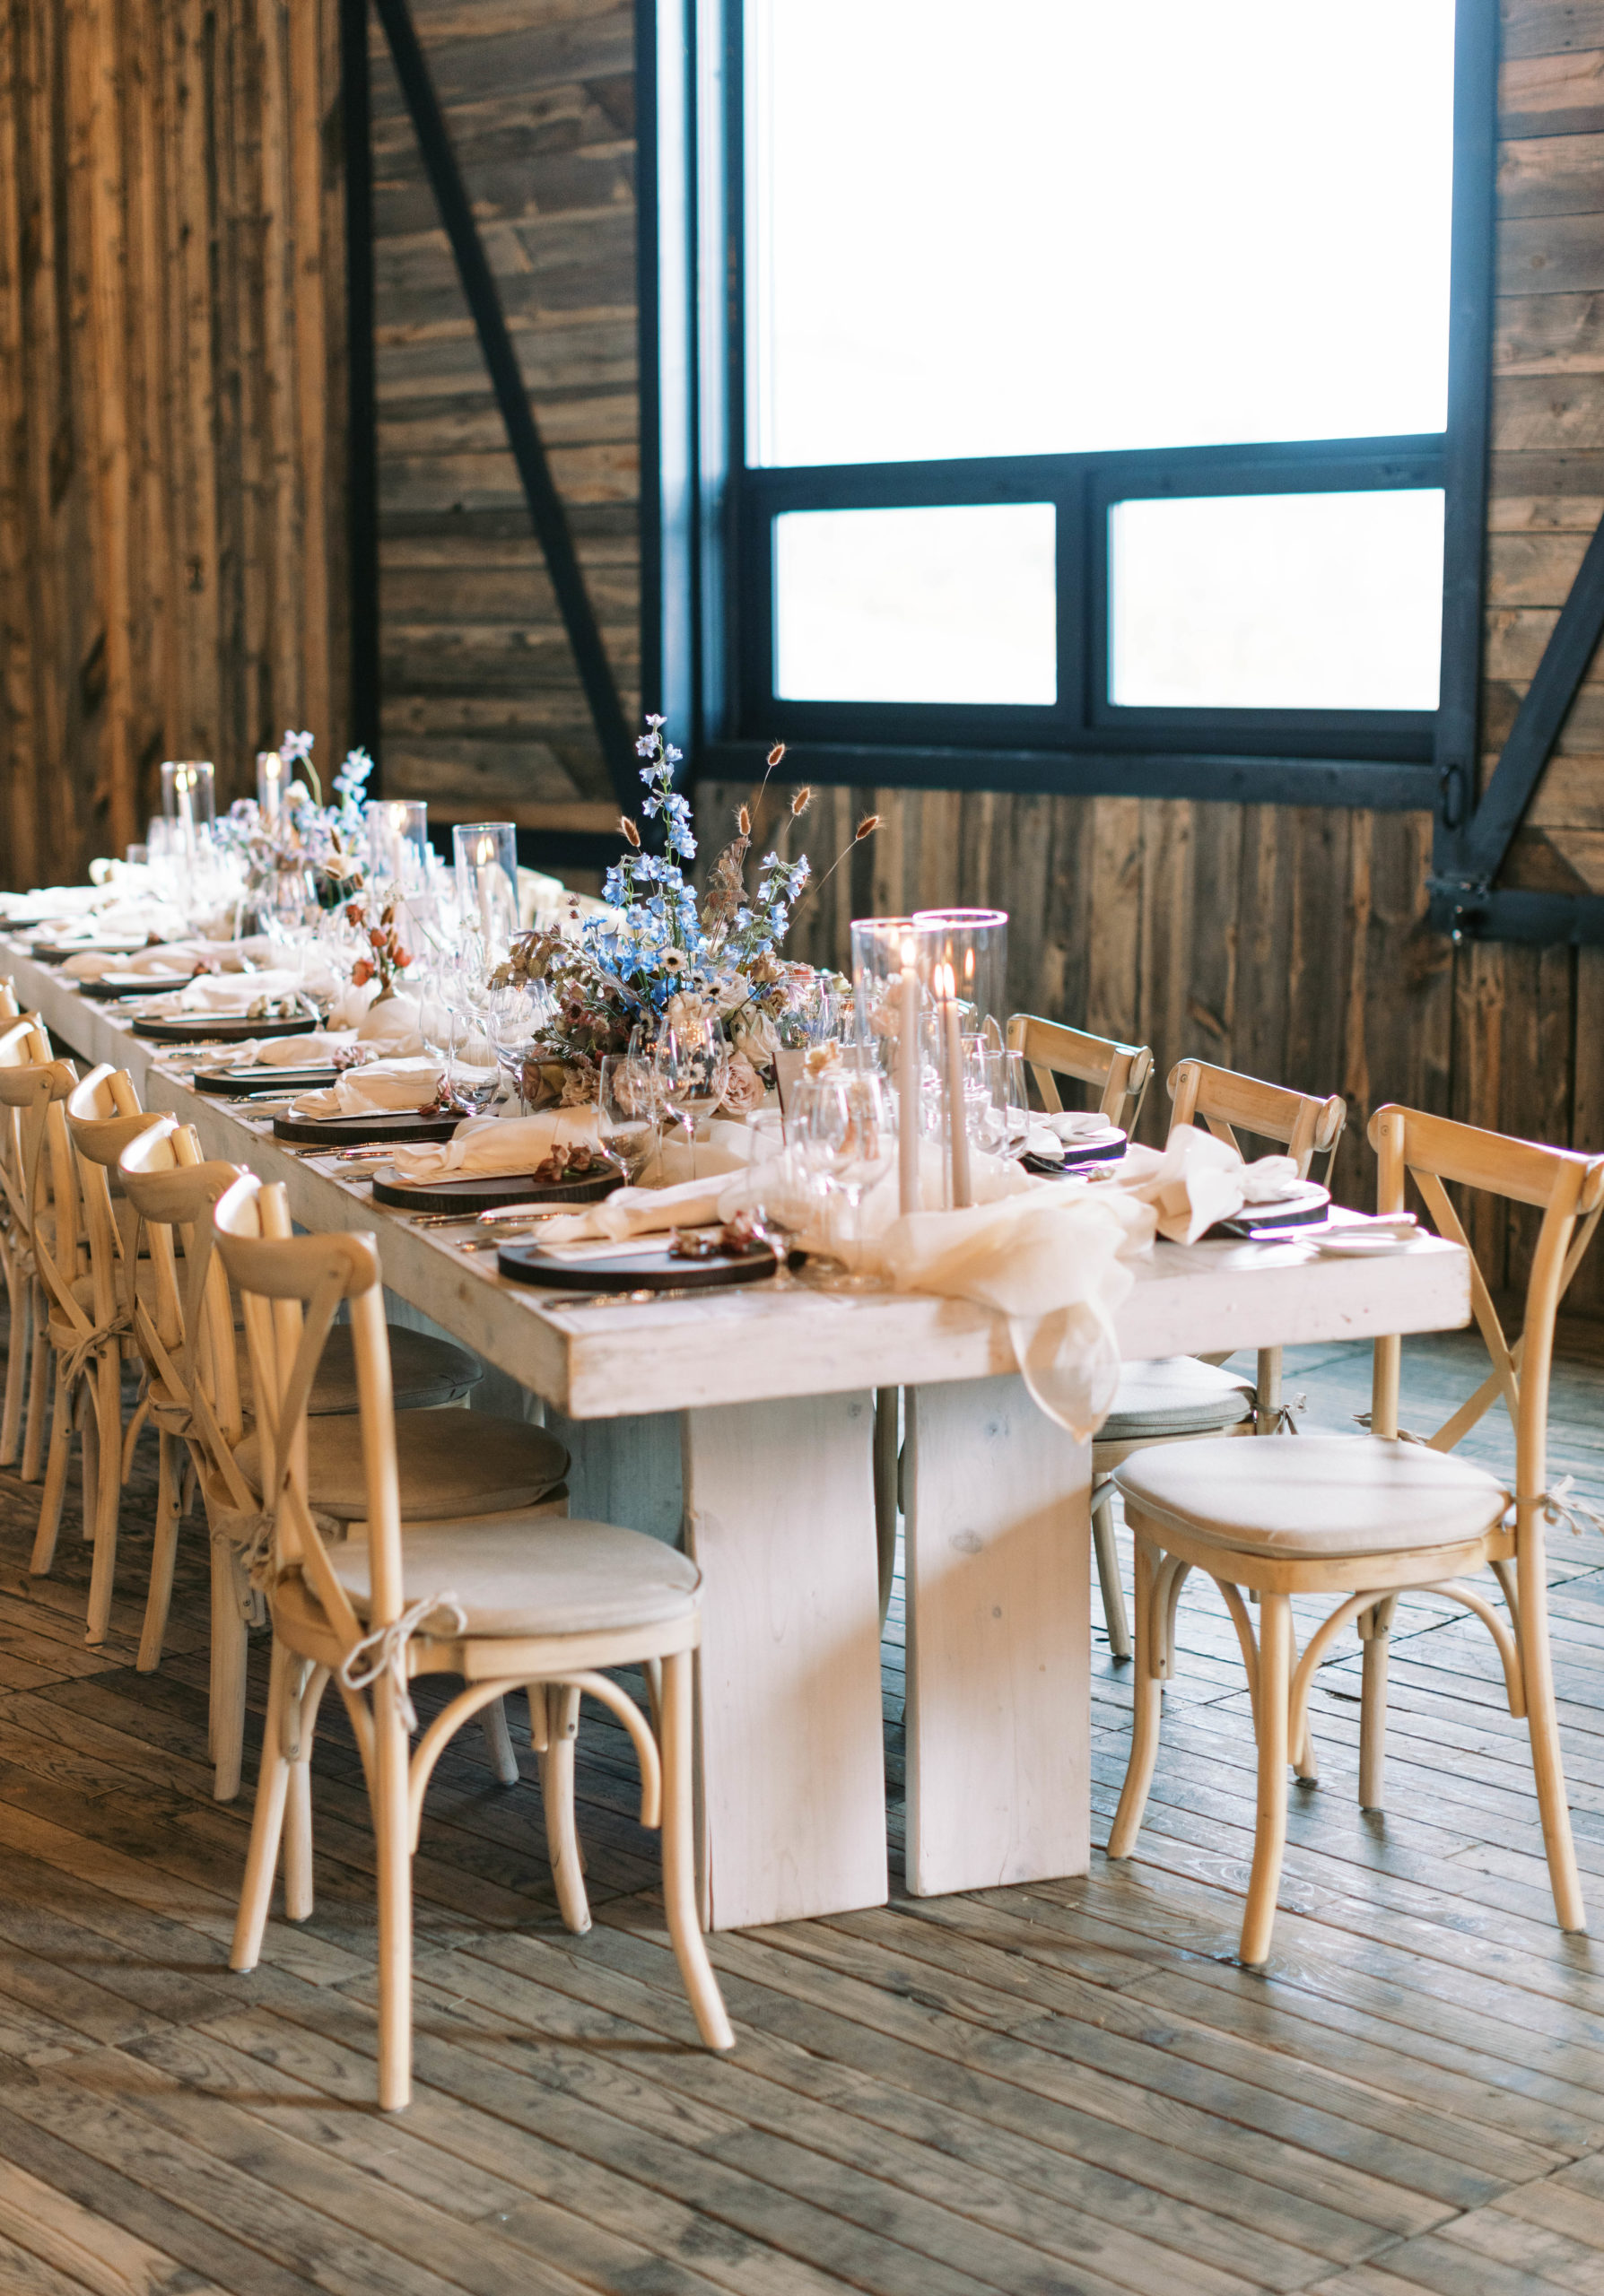 wedding table place setting with a custom menu, wooden chargers, and wildflower wedding centerpieces for an eclectic utah ranch wedding. photo by megan robinson photography